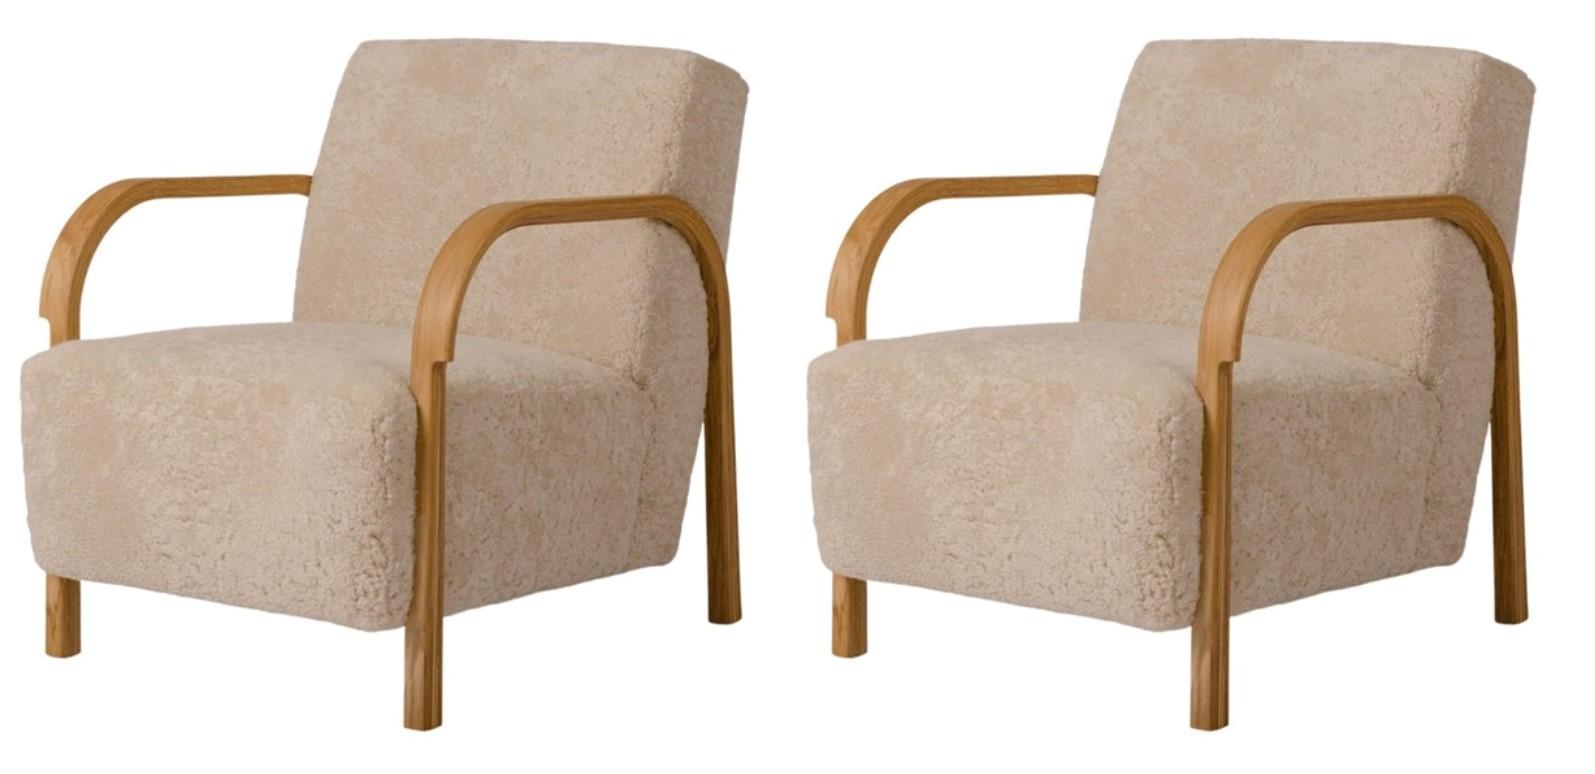 Set of 2 sheepskin ARCH lounge chairs by Mazo Design
Dimensions: W 69 x D 79 x H 76 cm
Materials: Oak, sheepskin.

With the new ARCH collection, mazo forges new paths with their forward-looking modernism. The series is a tribute to the renowned